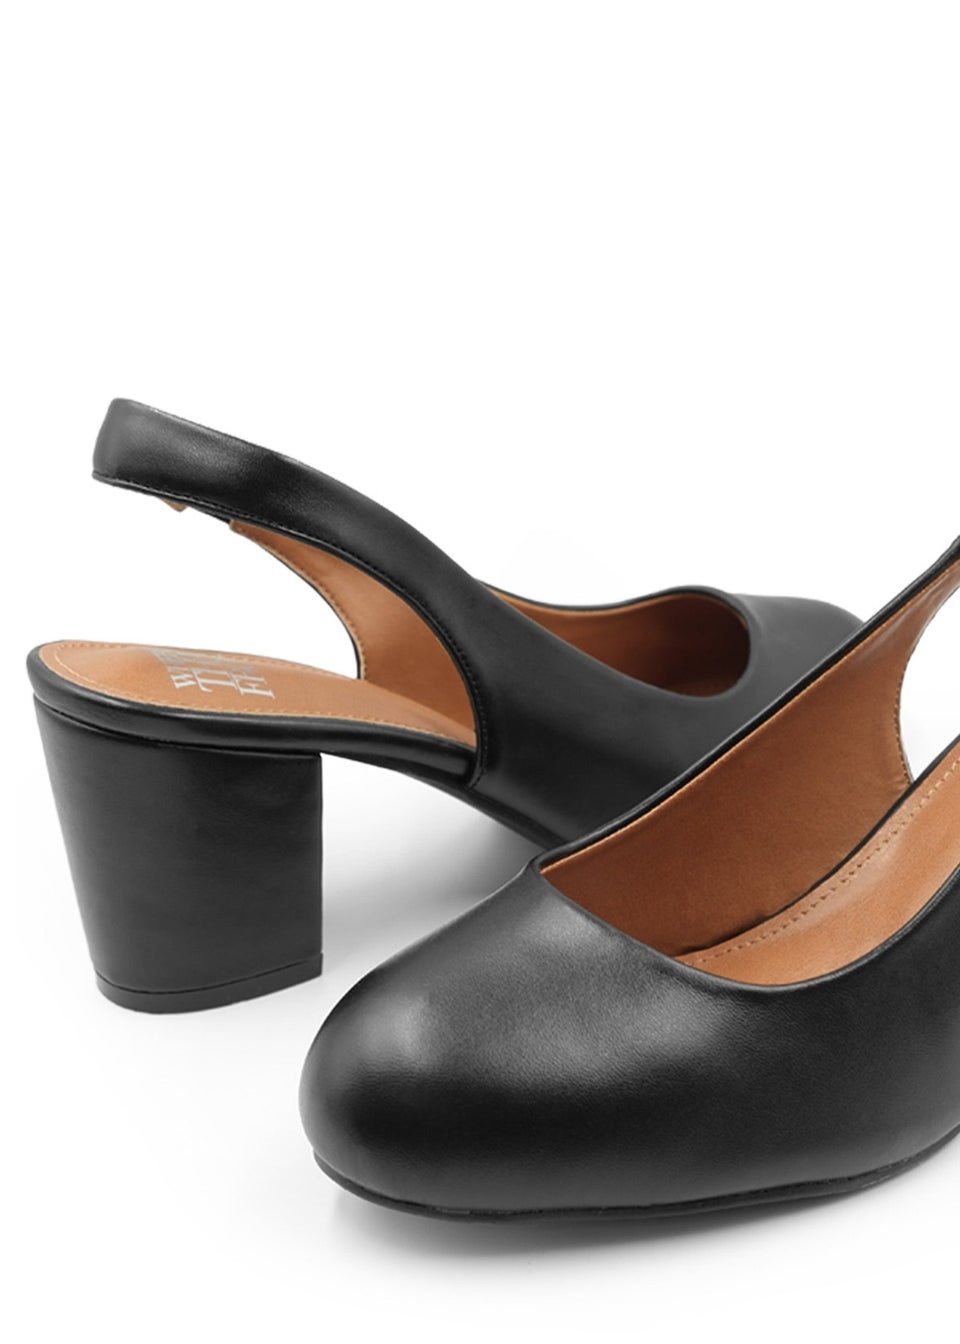 Where's That From Black Pu Edith Block Heel Slingback Shoes